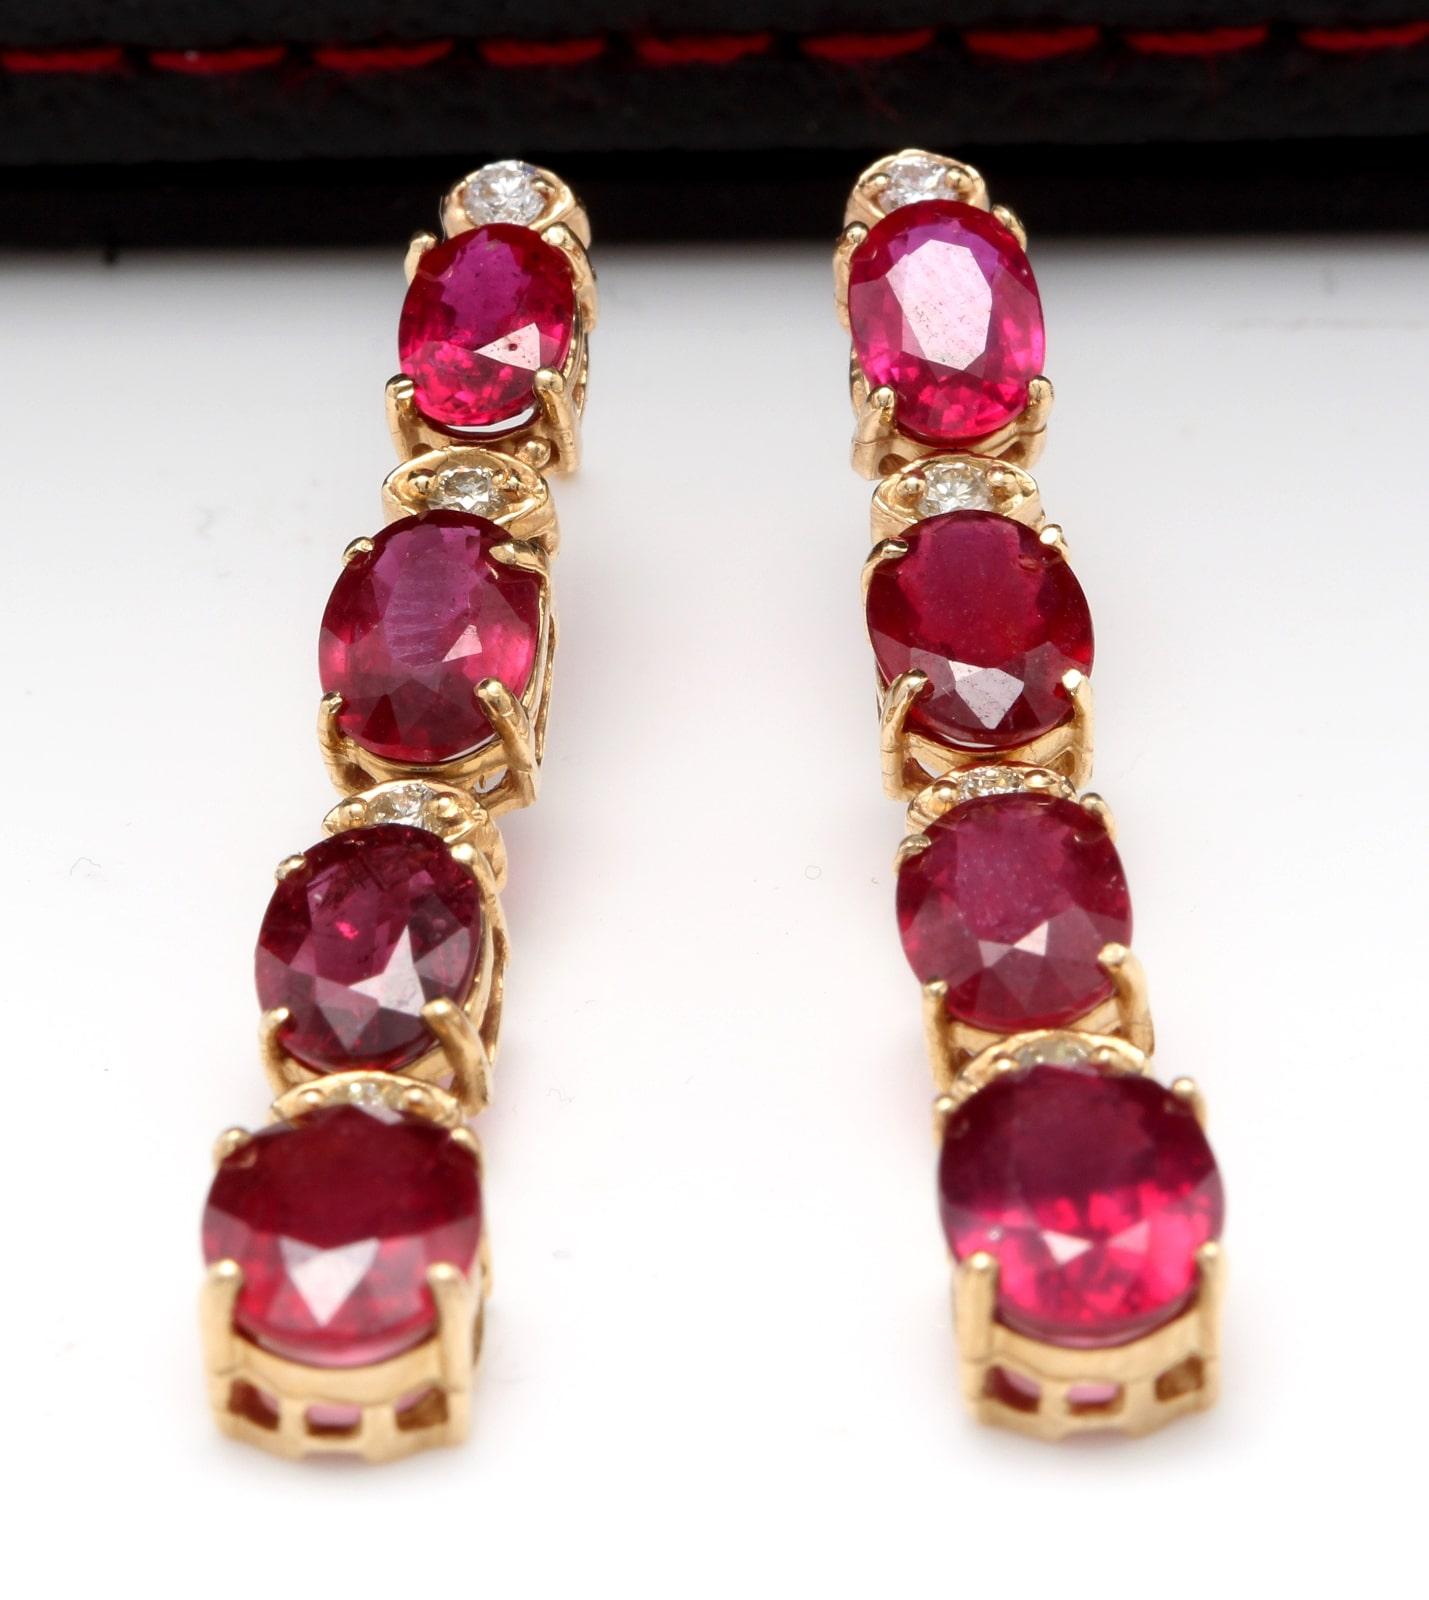 Exquisite 7.30 Carats Natural Red Ruby and Diamond 14K Solid Yellow Gold Earrings

Amazing looking piece!

Total Natural Round Cut White Diamonds Weight: Approx. 0.30 Carats (color G-H / Clarity SI1-SI2)

Total Natural Oval Cut Red Rubies Weight: